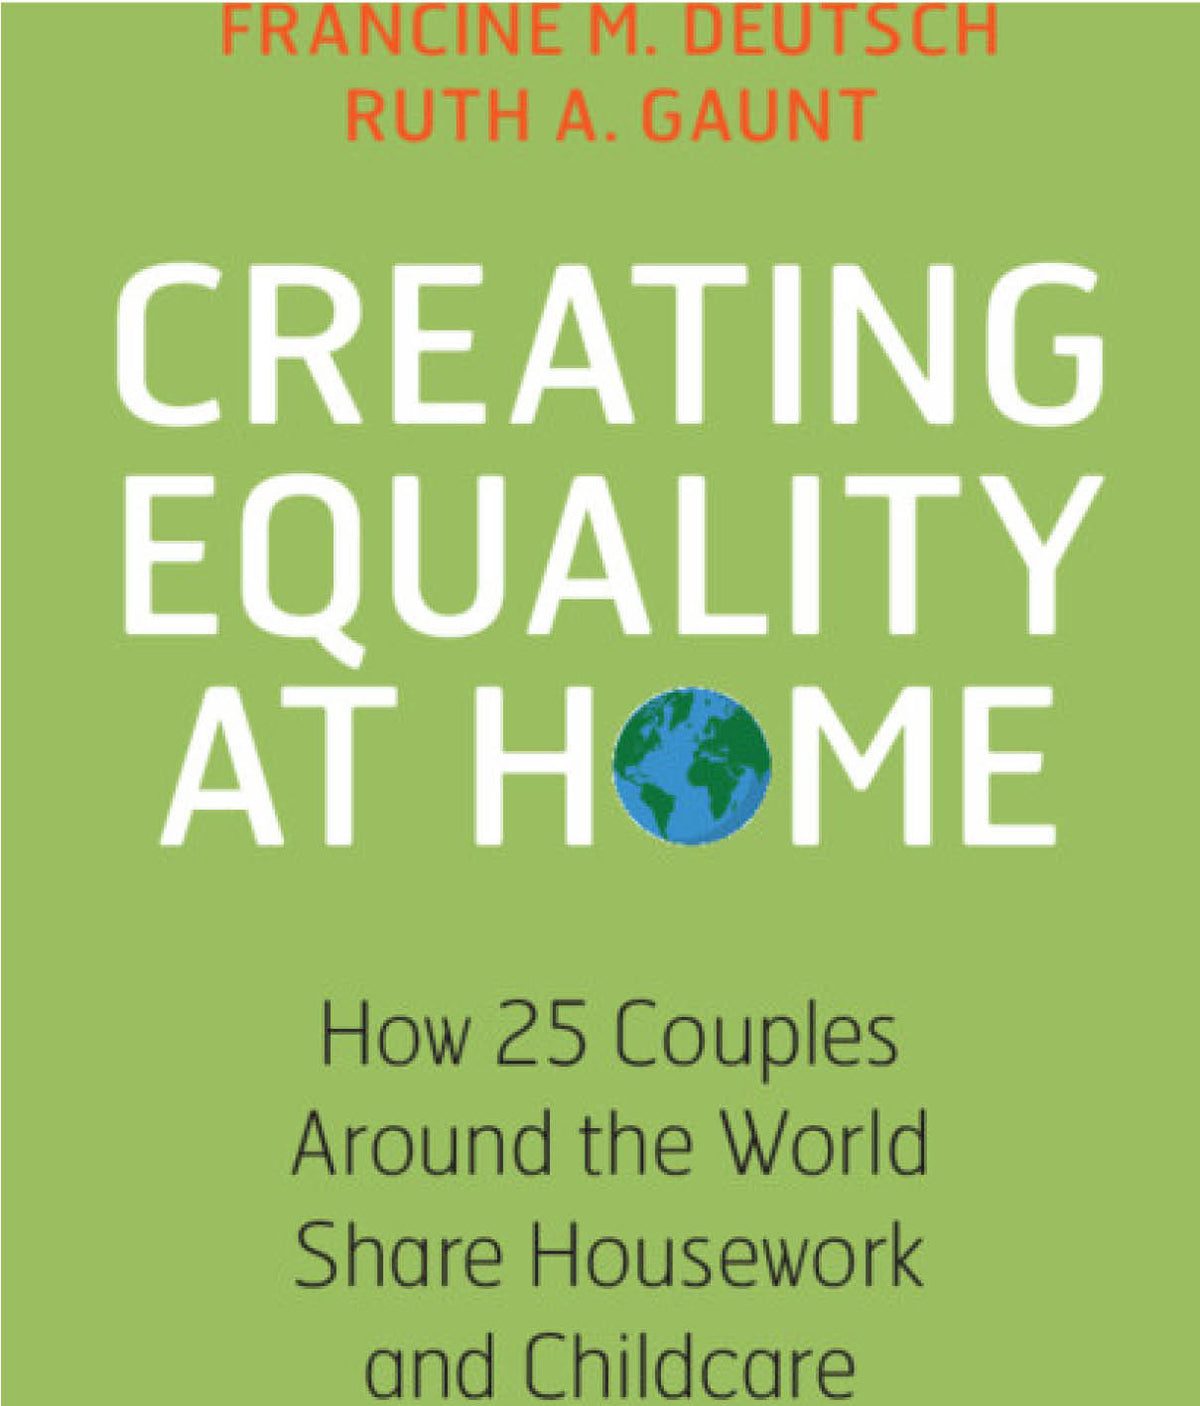 Creating Equality at Home: How 25 Couples around the World Share Housework and Childcare by Francine M. Deutsch &amp; Ruth A. Gaunt